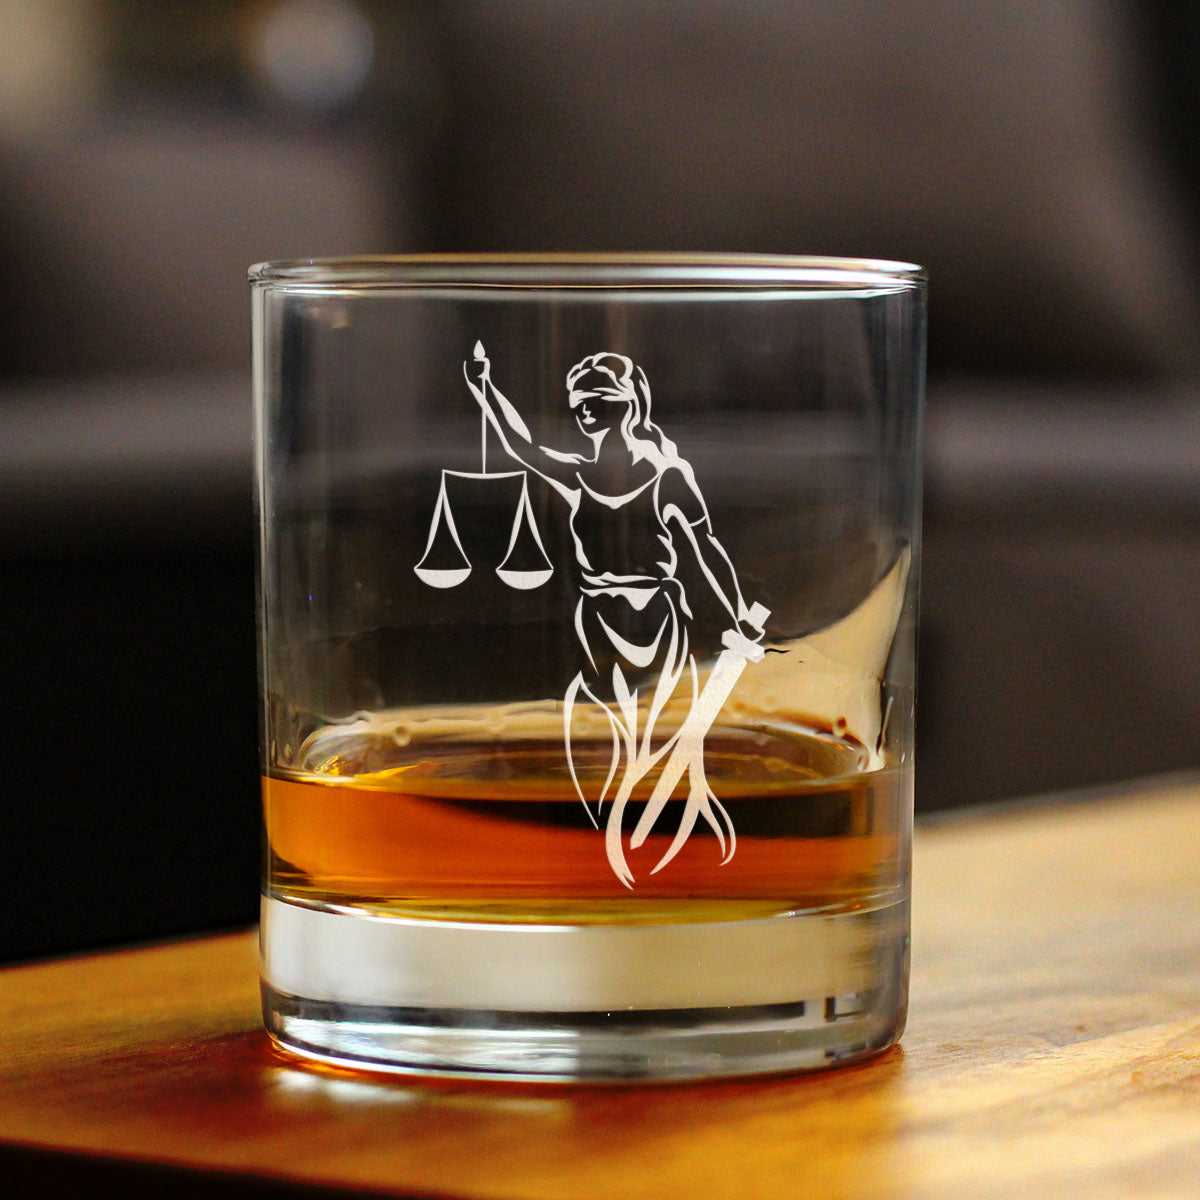 Lady Justice - Whiskey Rocks Glass - Lawyers and Attorneys Themed Gifts or Party Decor for Women and Men - 10.25 Oz